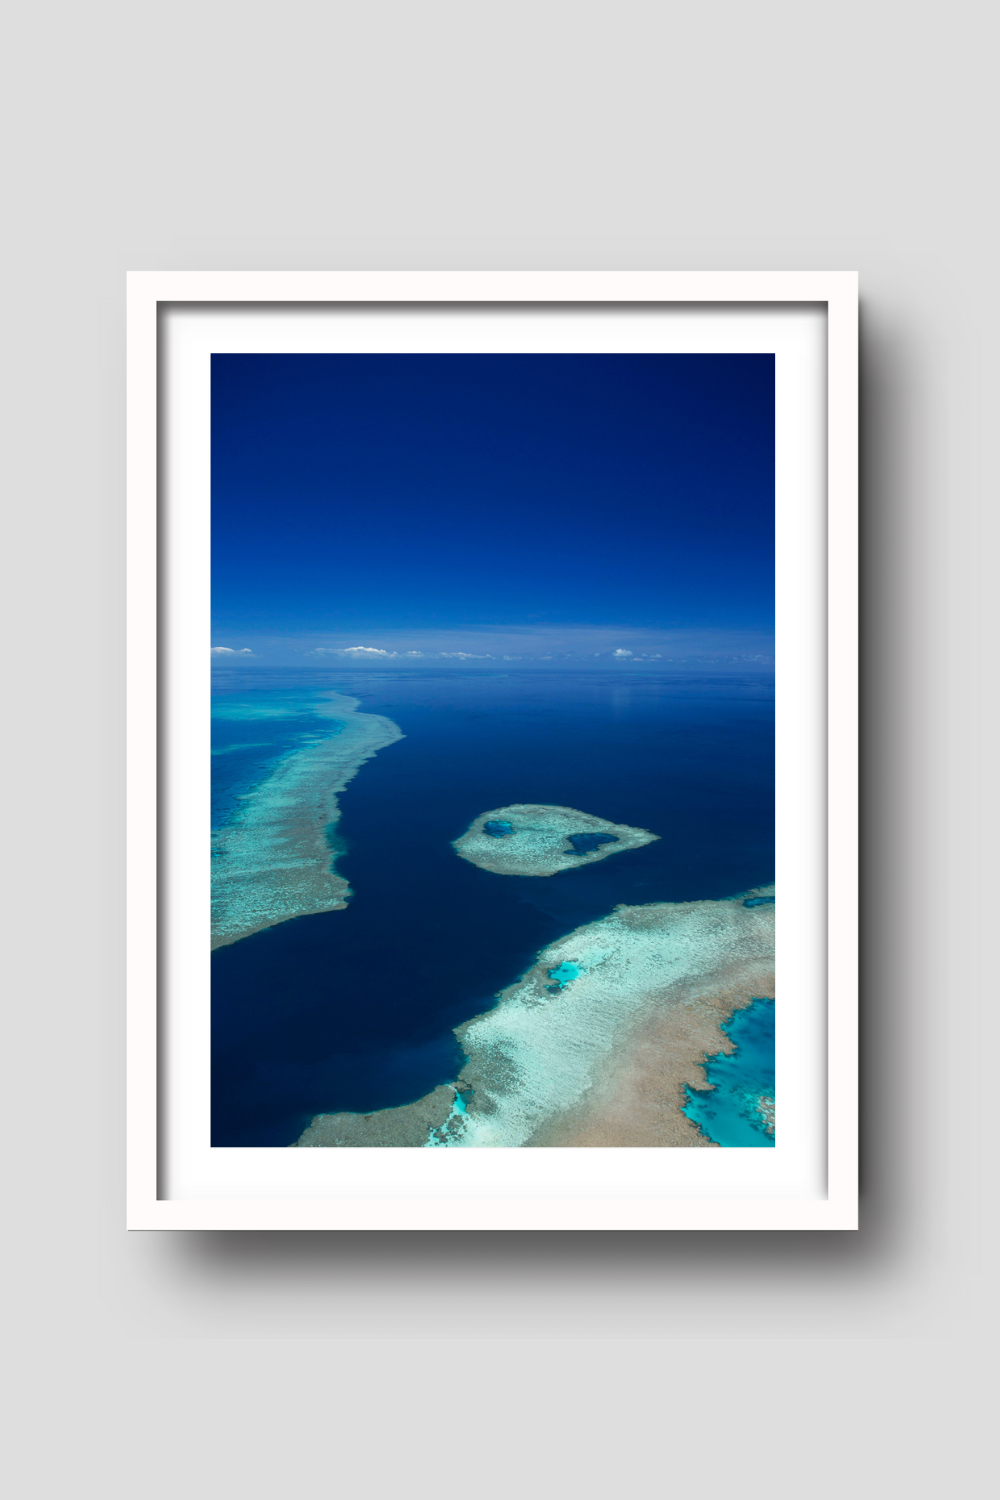 aerial of blue ocean and sky with fringing reef and an island of coral reef creating turquiose coloured water 